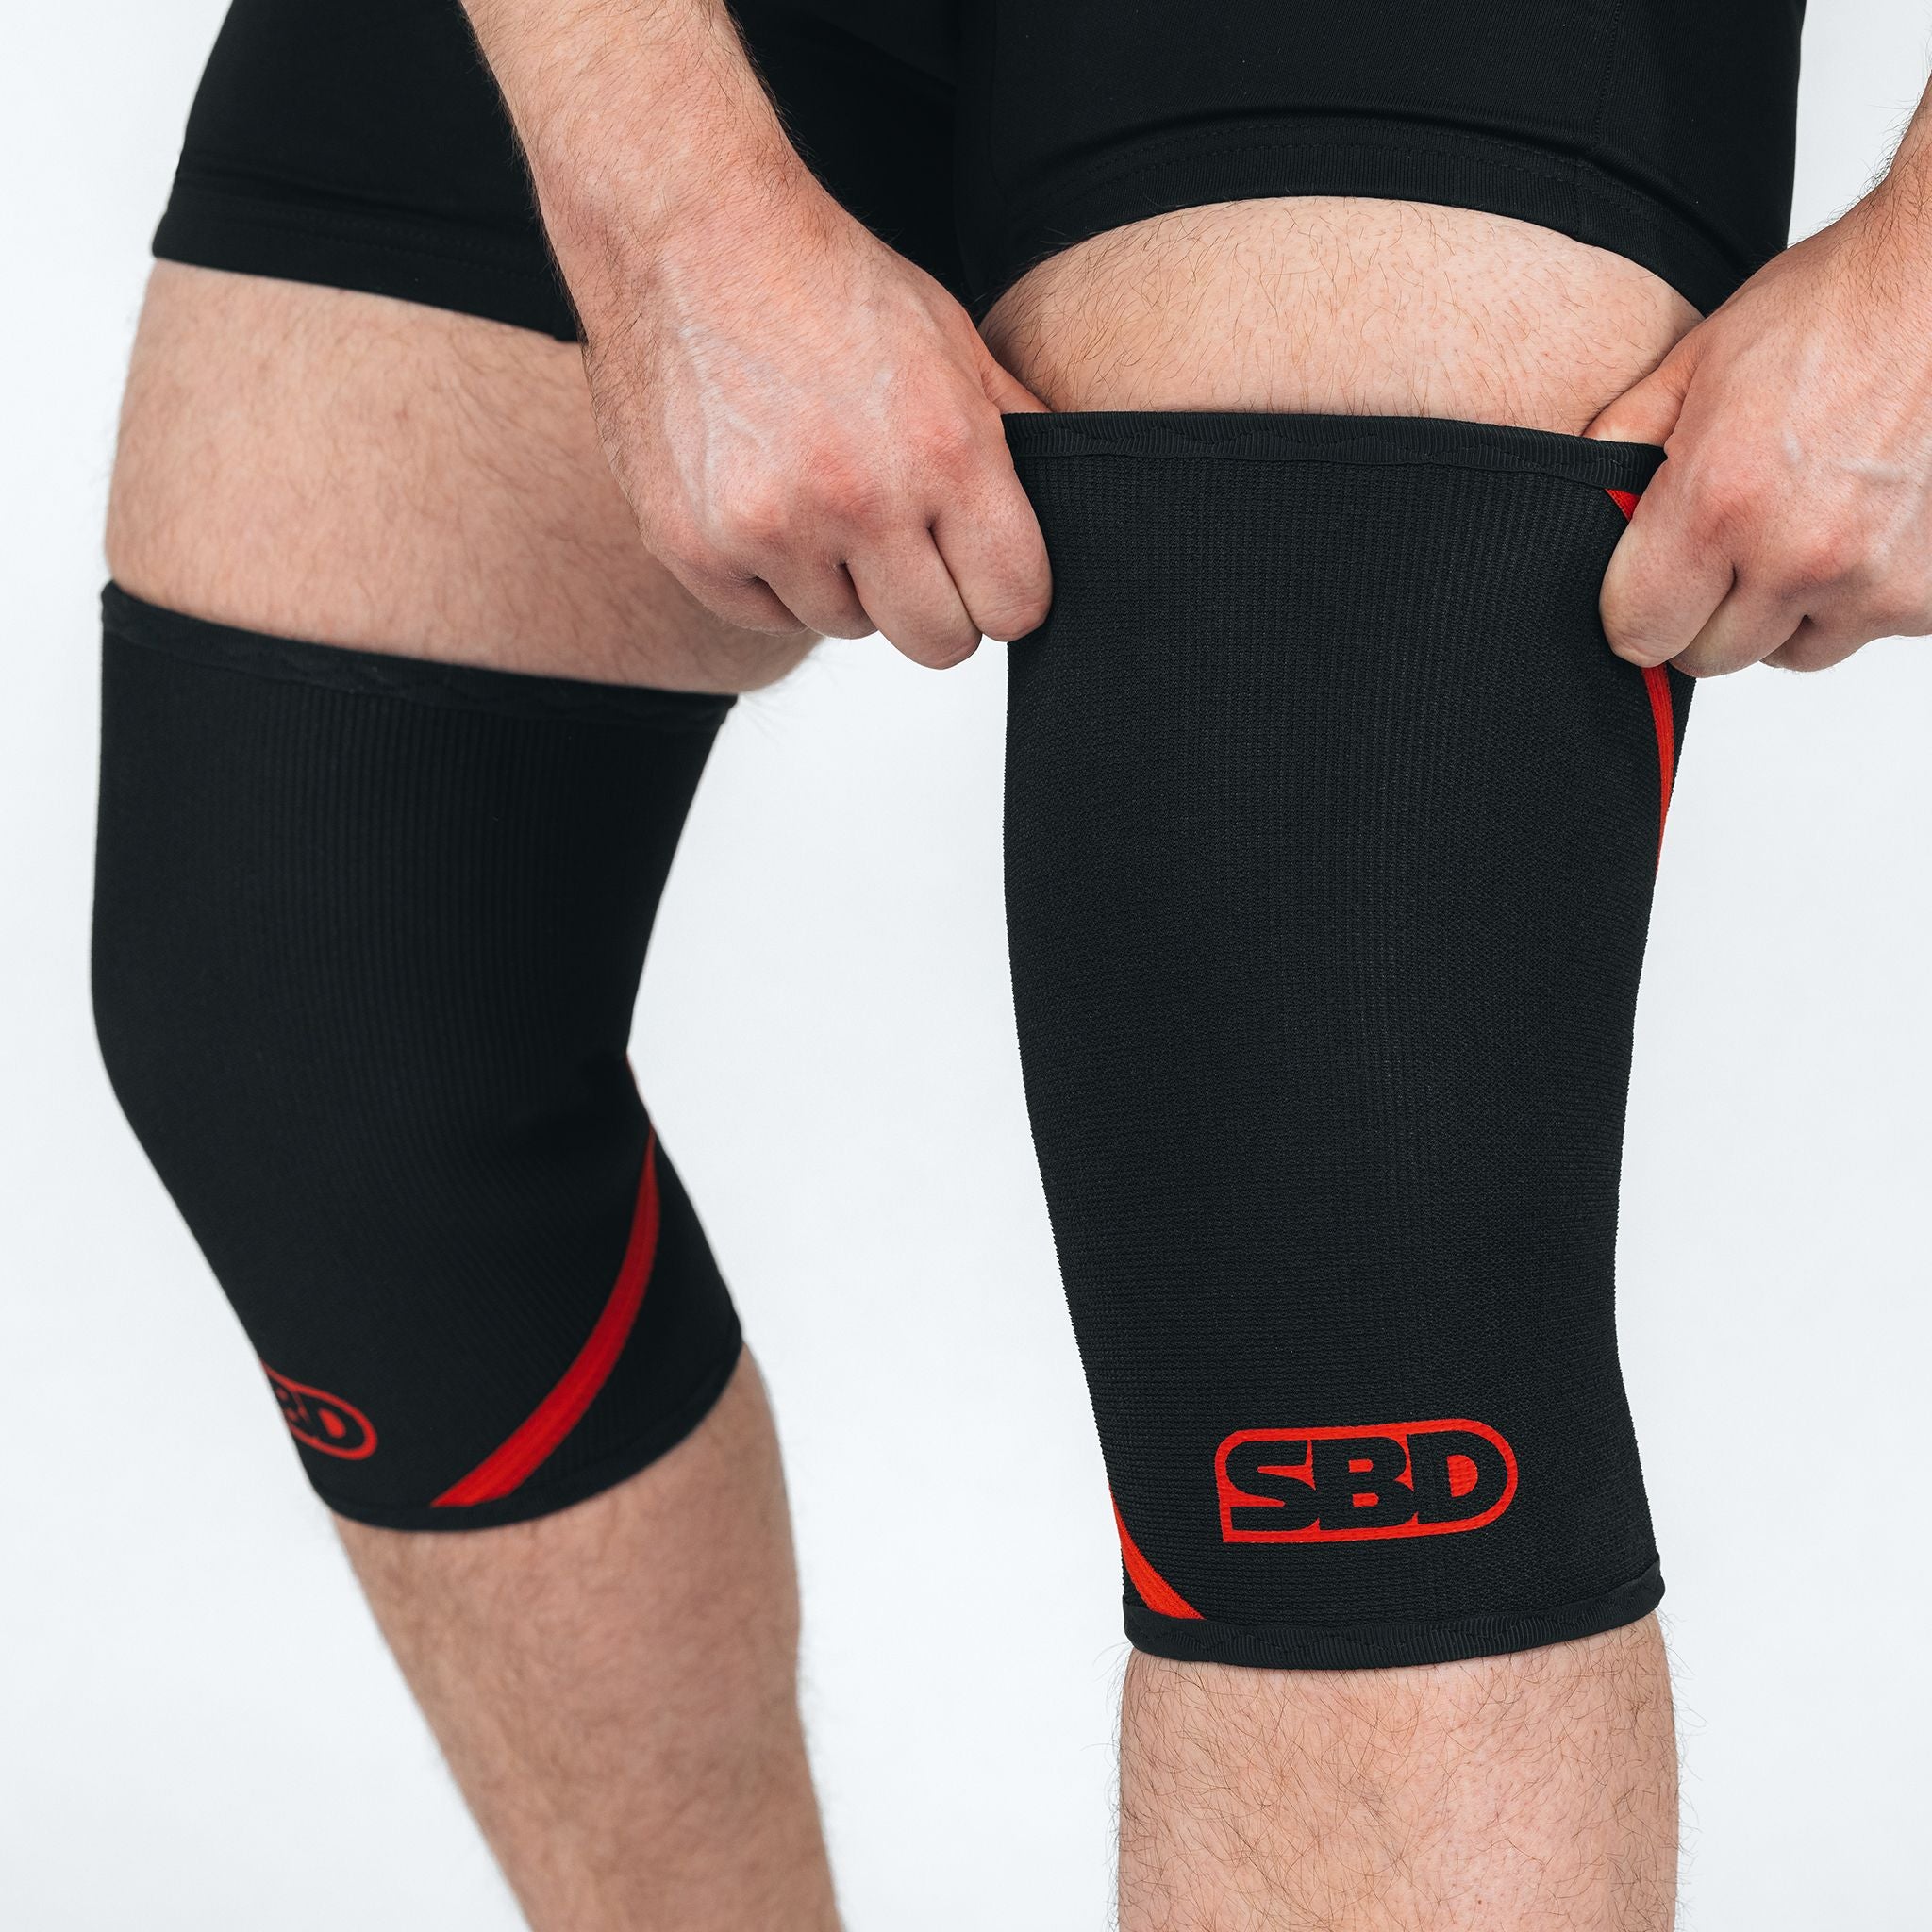 SBD Elbow Sleeves – City Strength